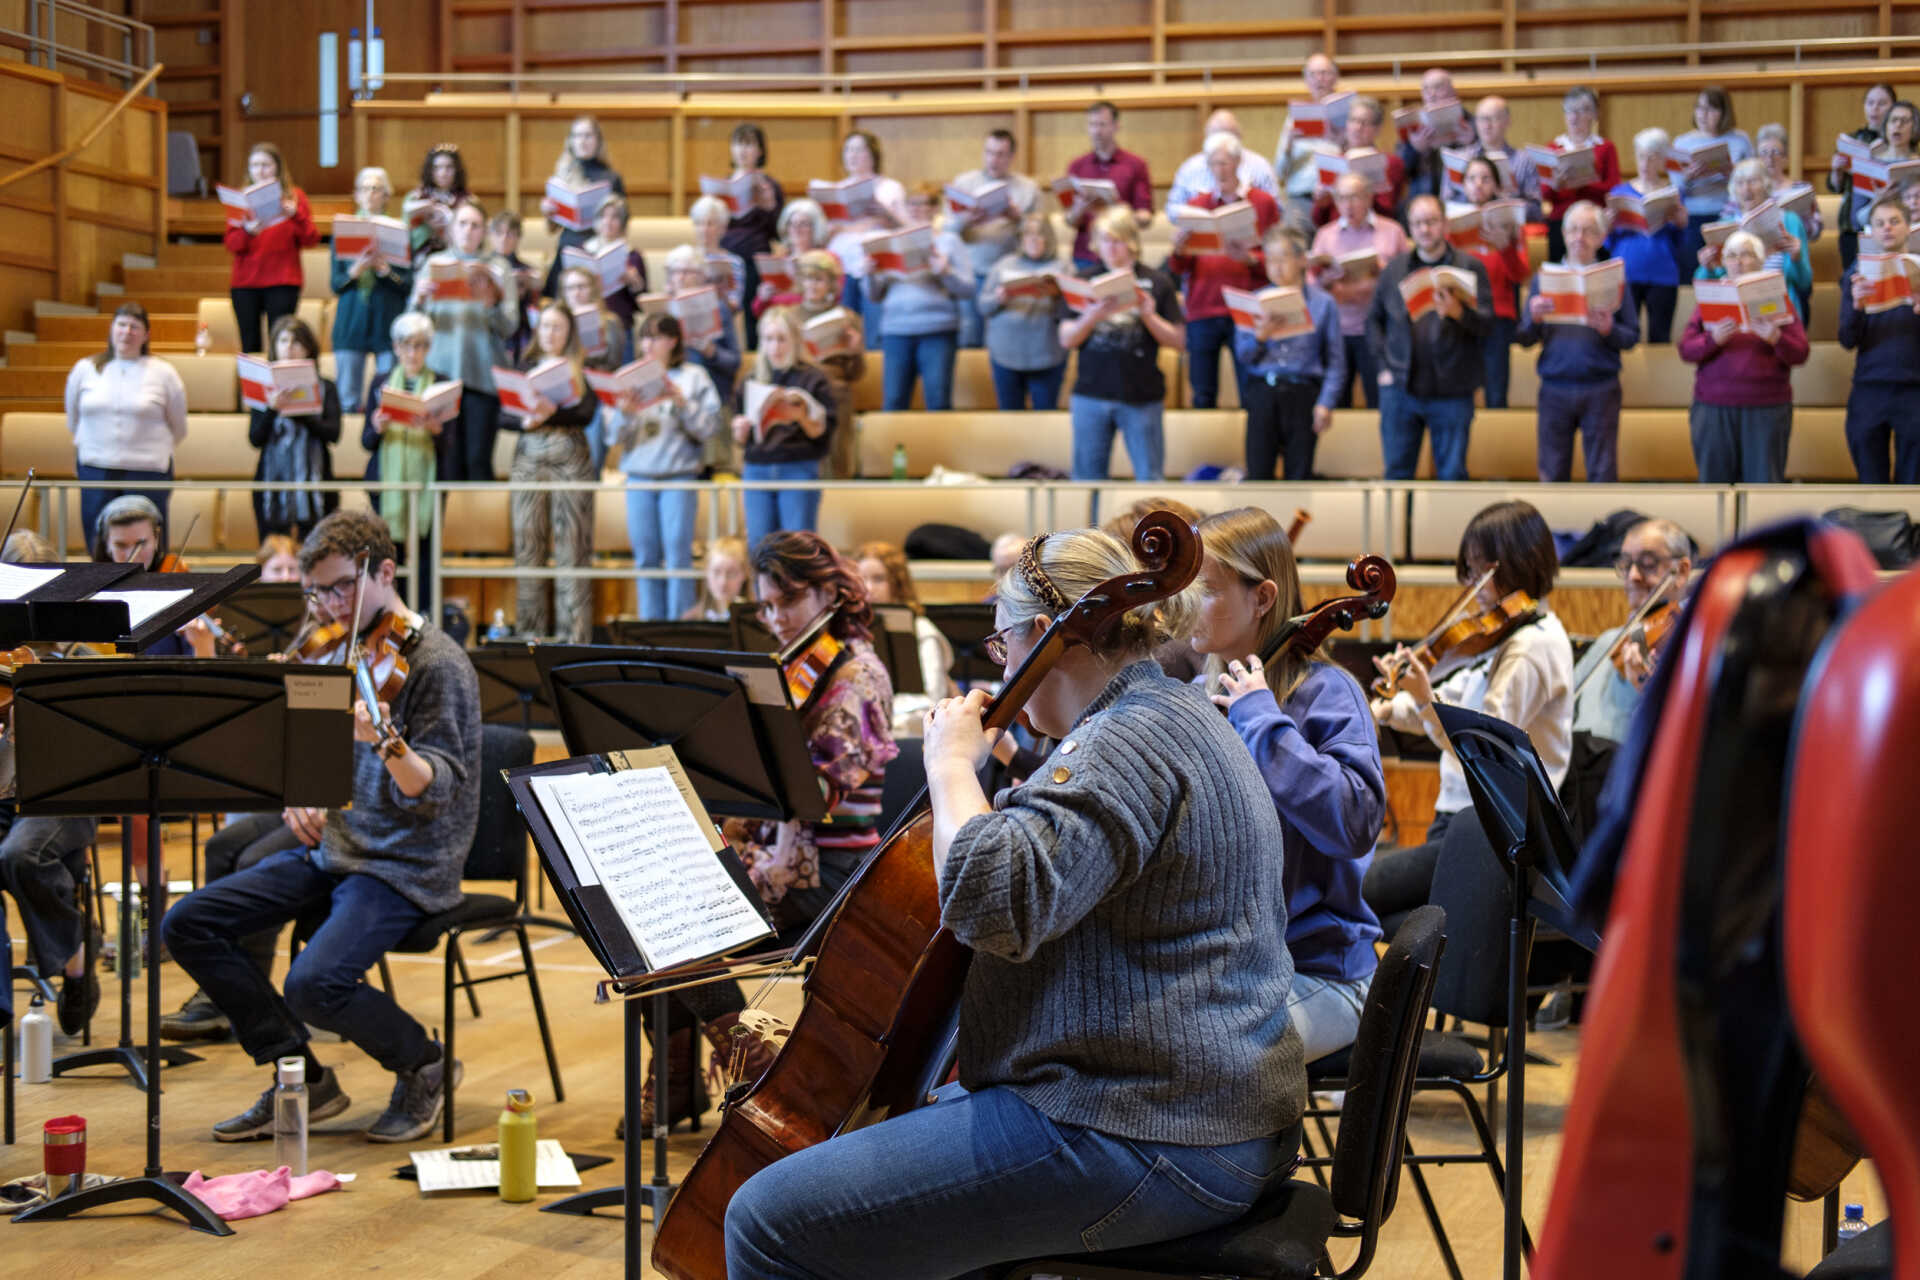 Group of musicians rehearsing in the concert-hall